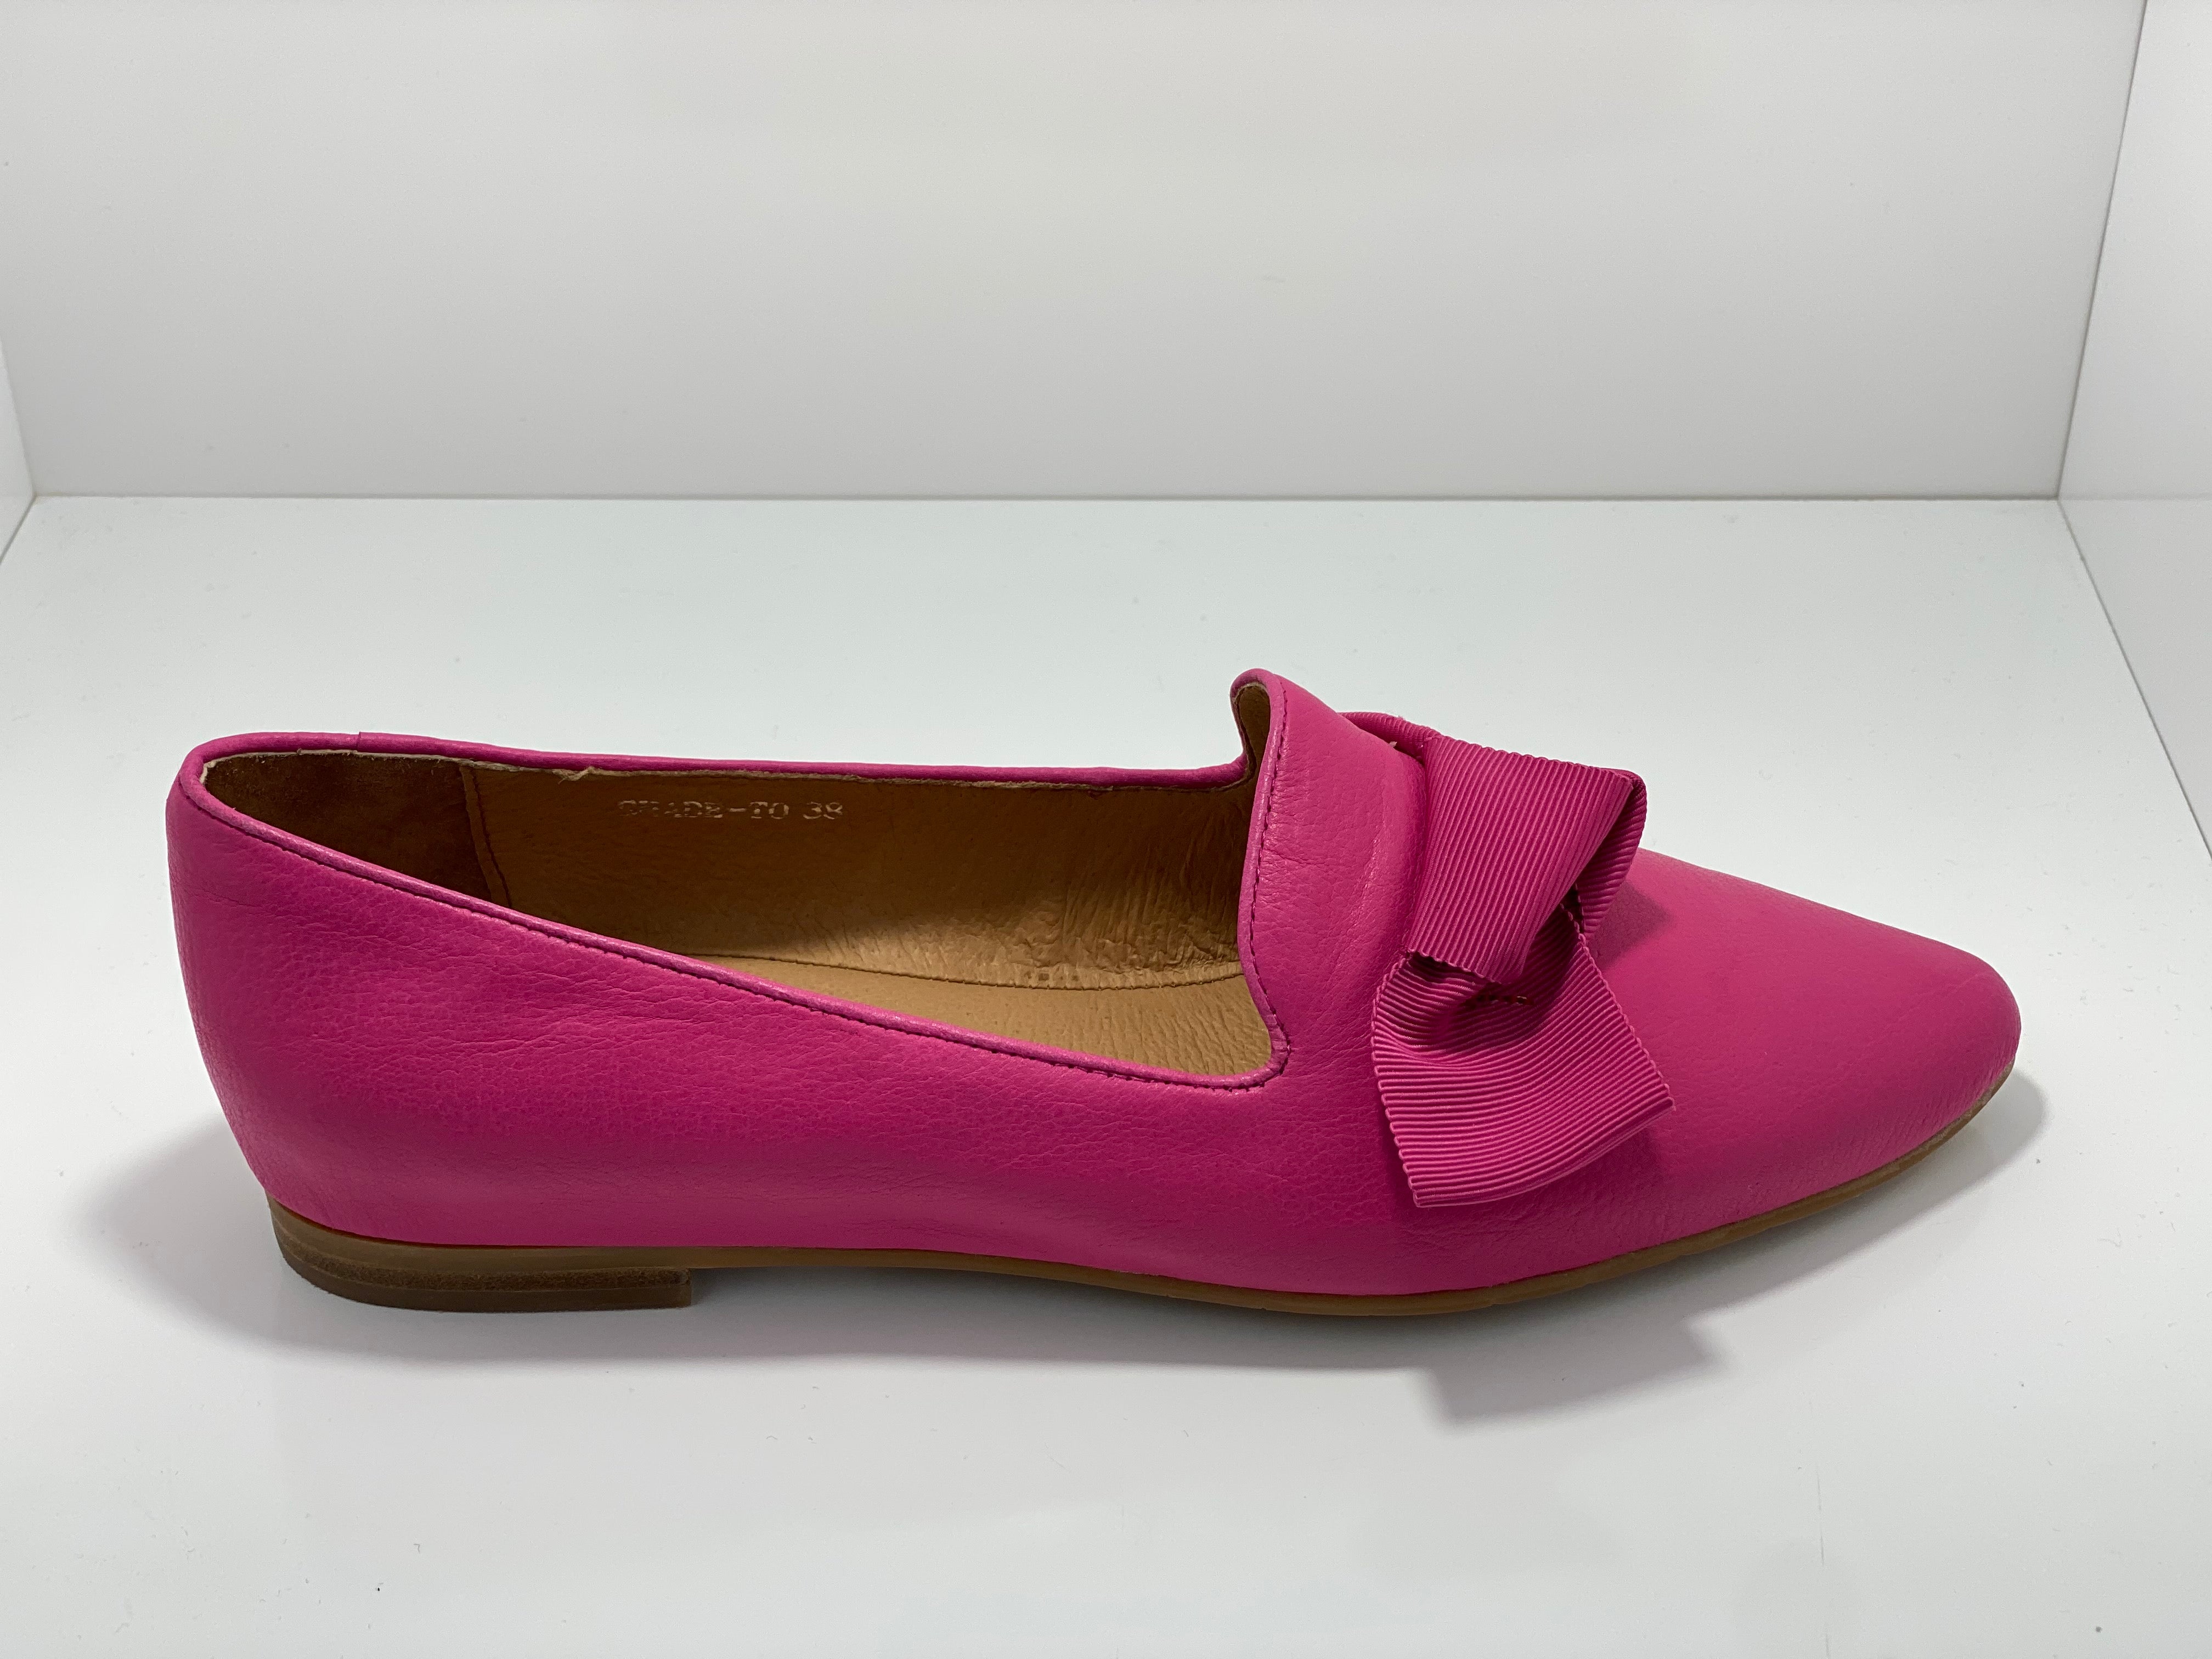 Shade Slip On Leather Shoe with Bow